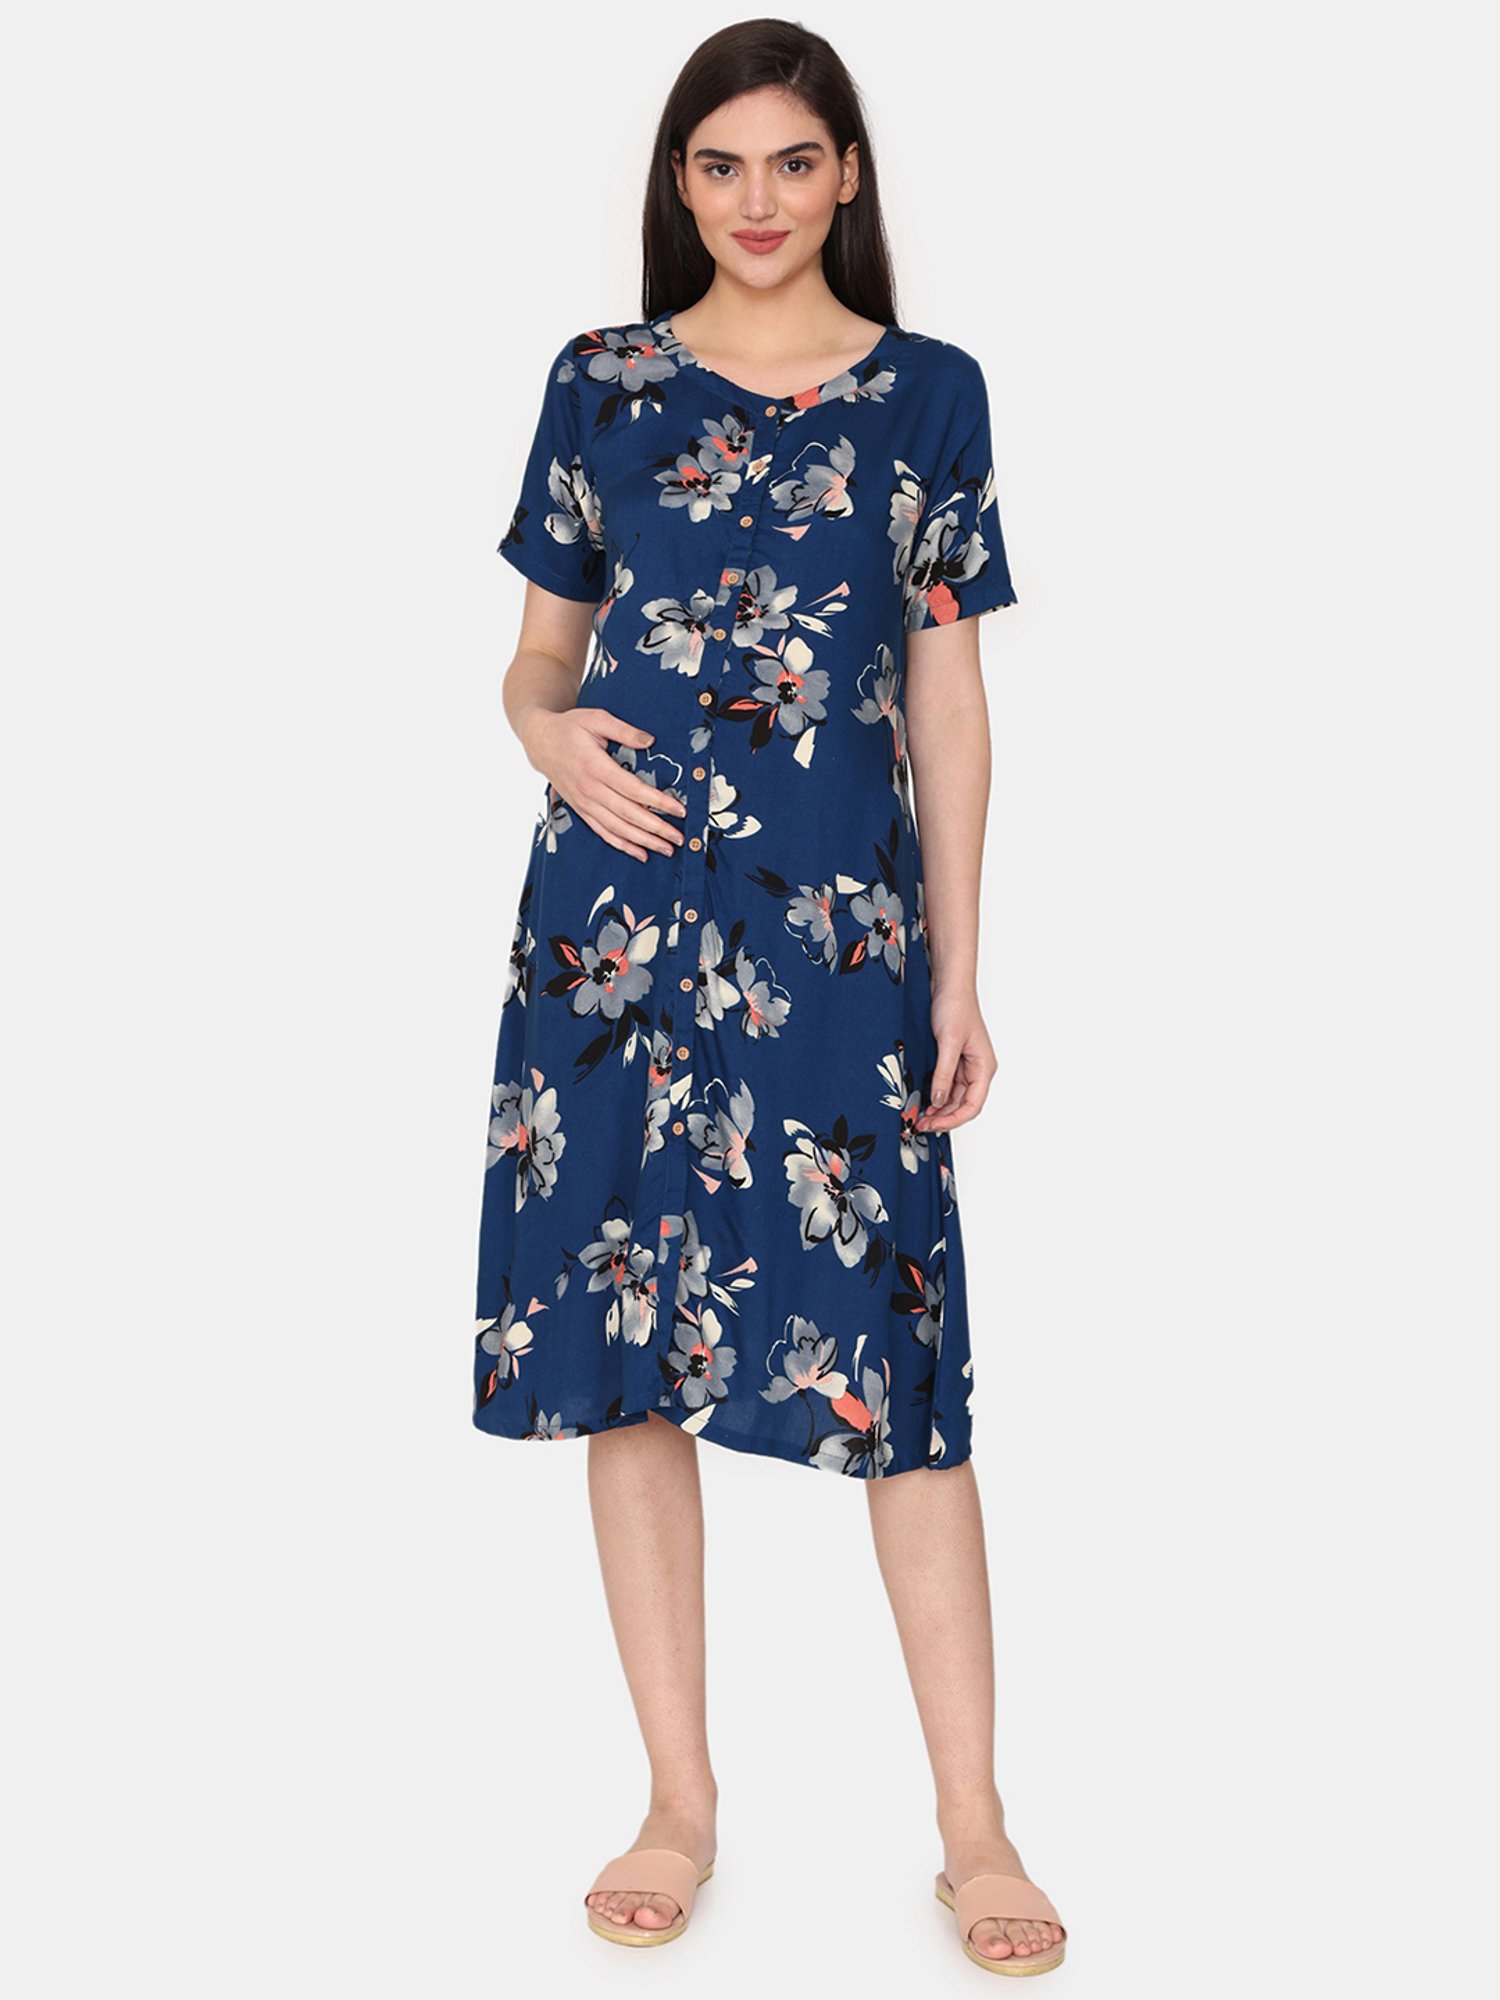 Coucou by Zivame Blue Printed Maternity Night Dress